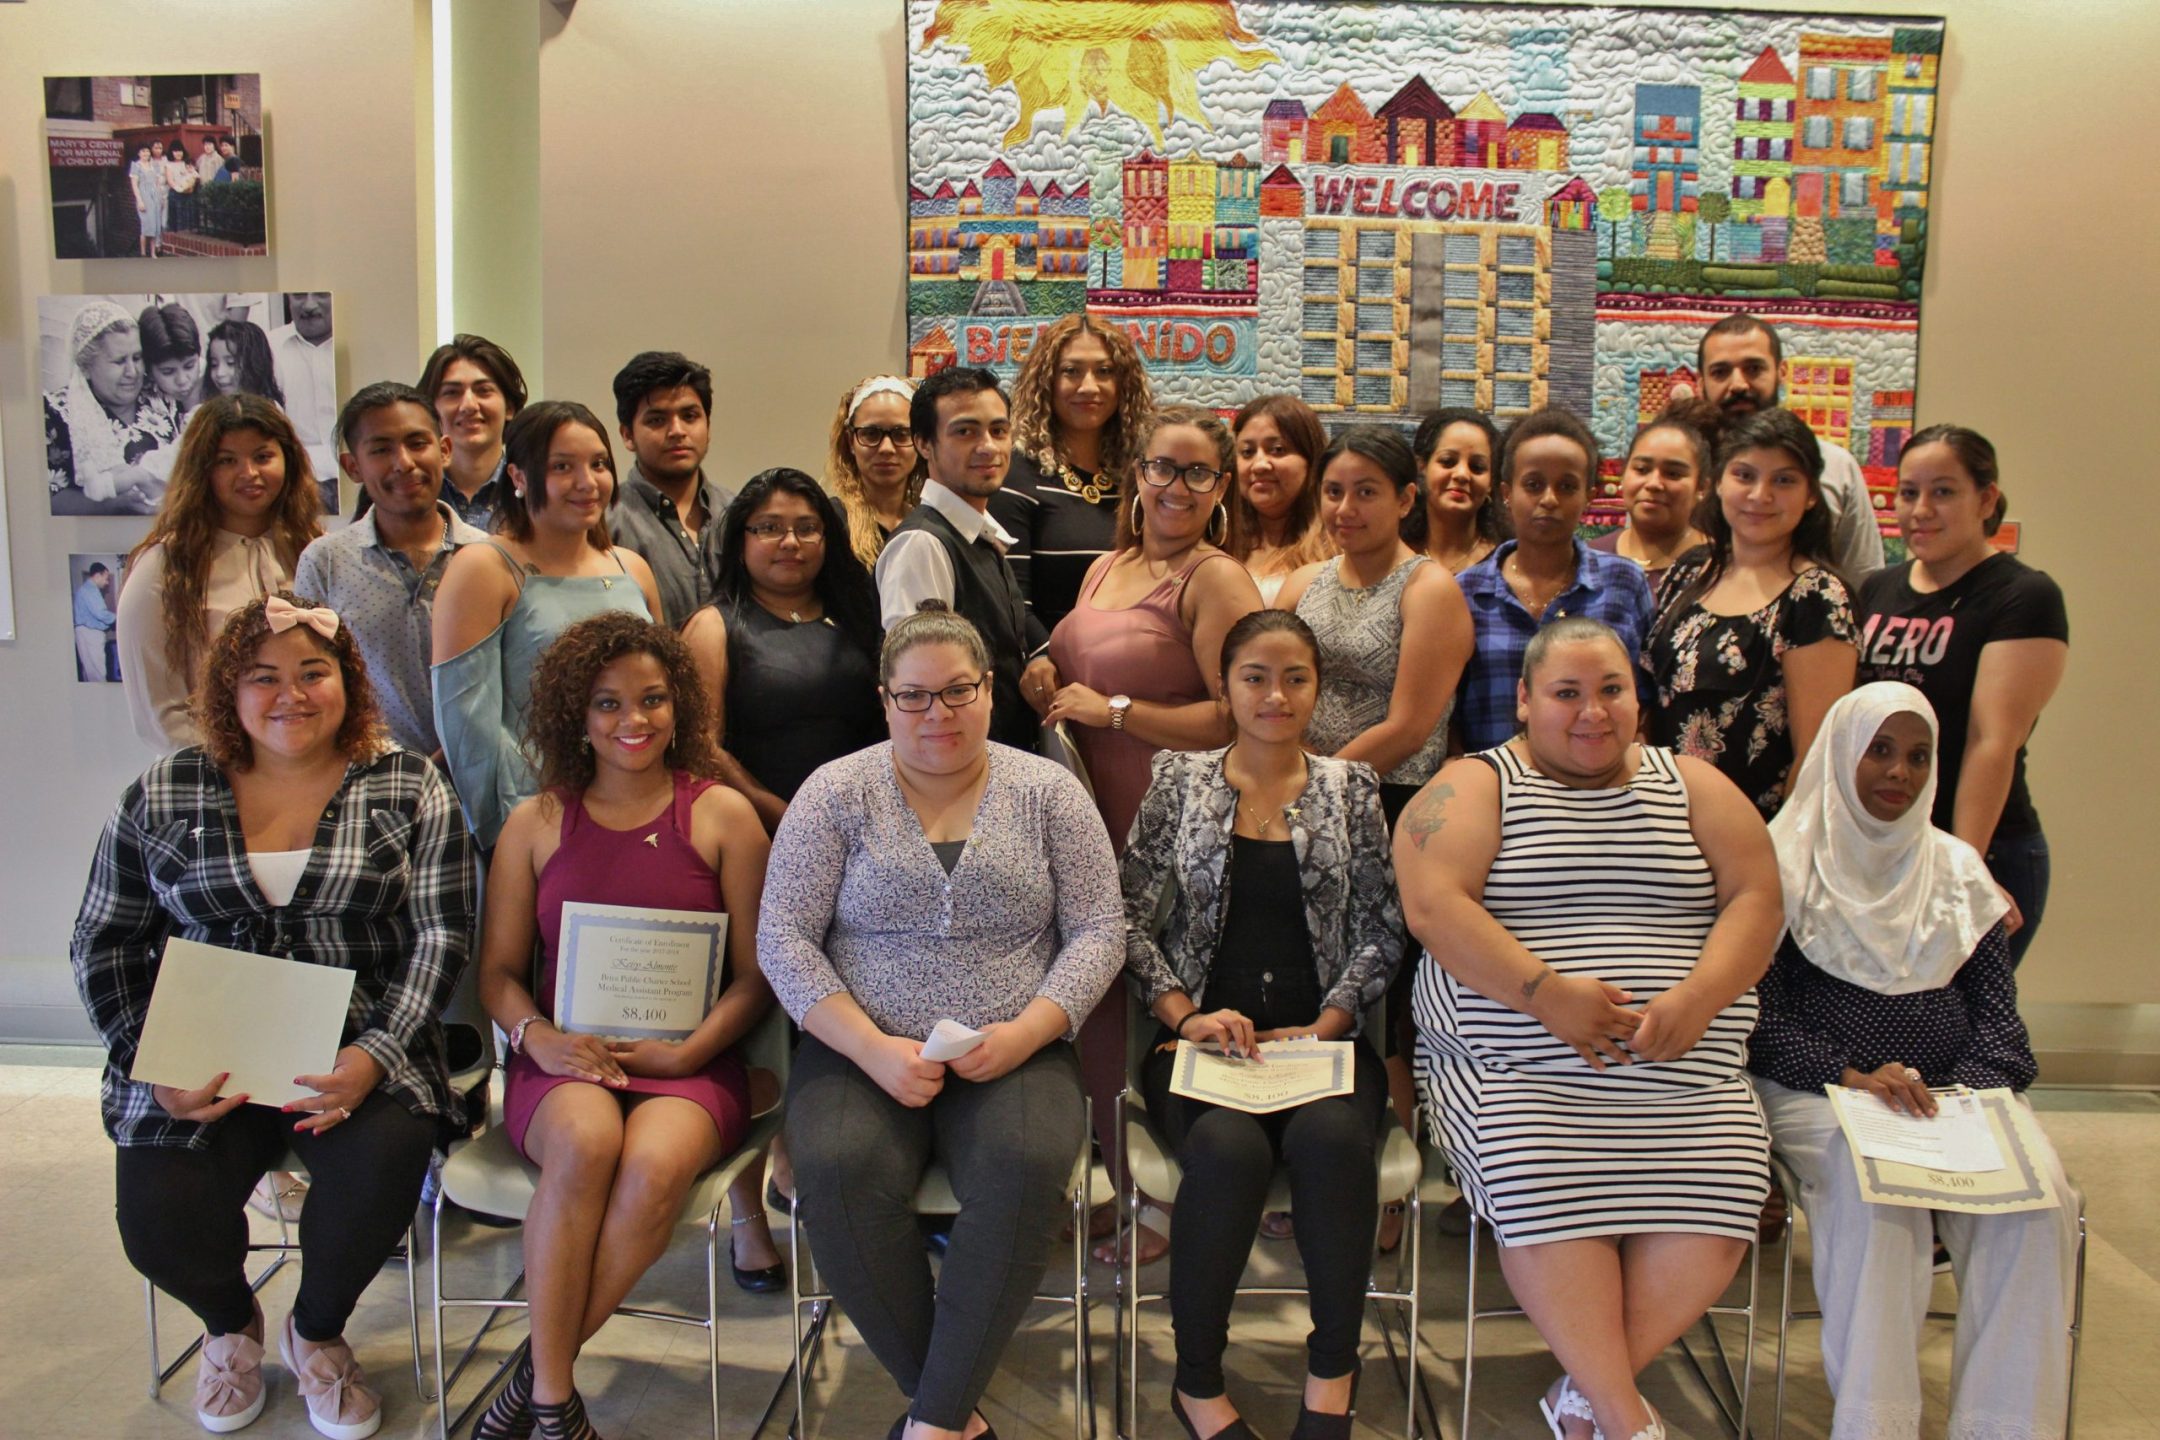 Fifth class of students enters Medical Assistant Program